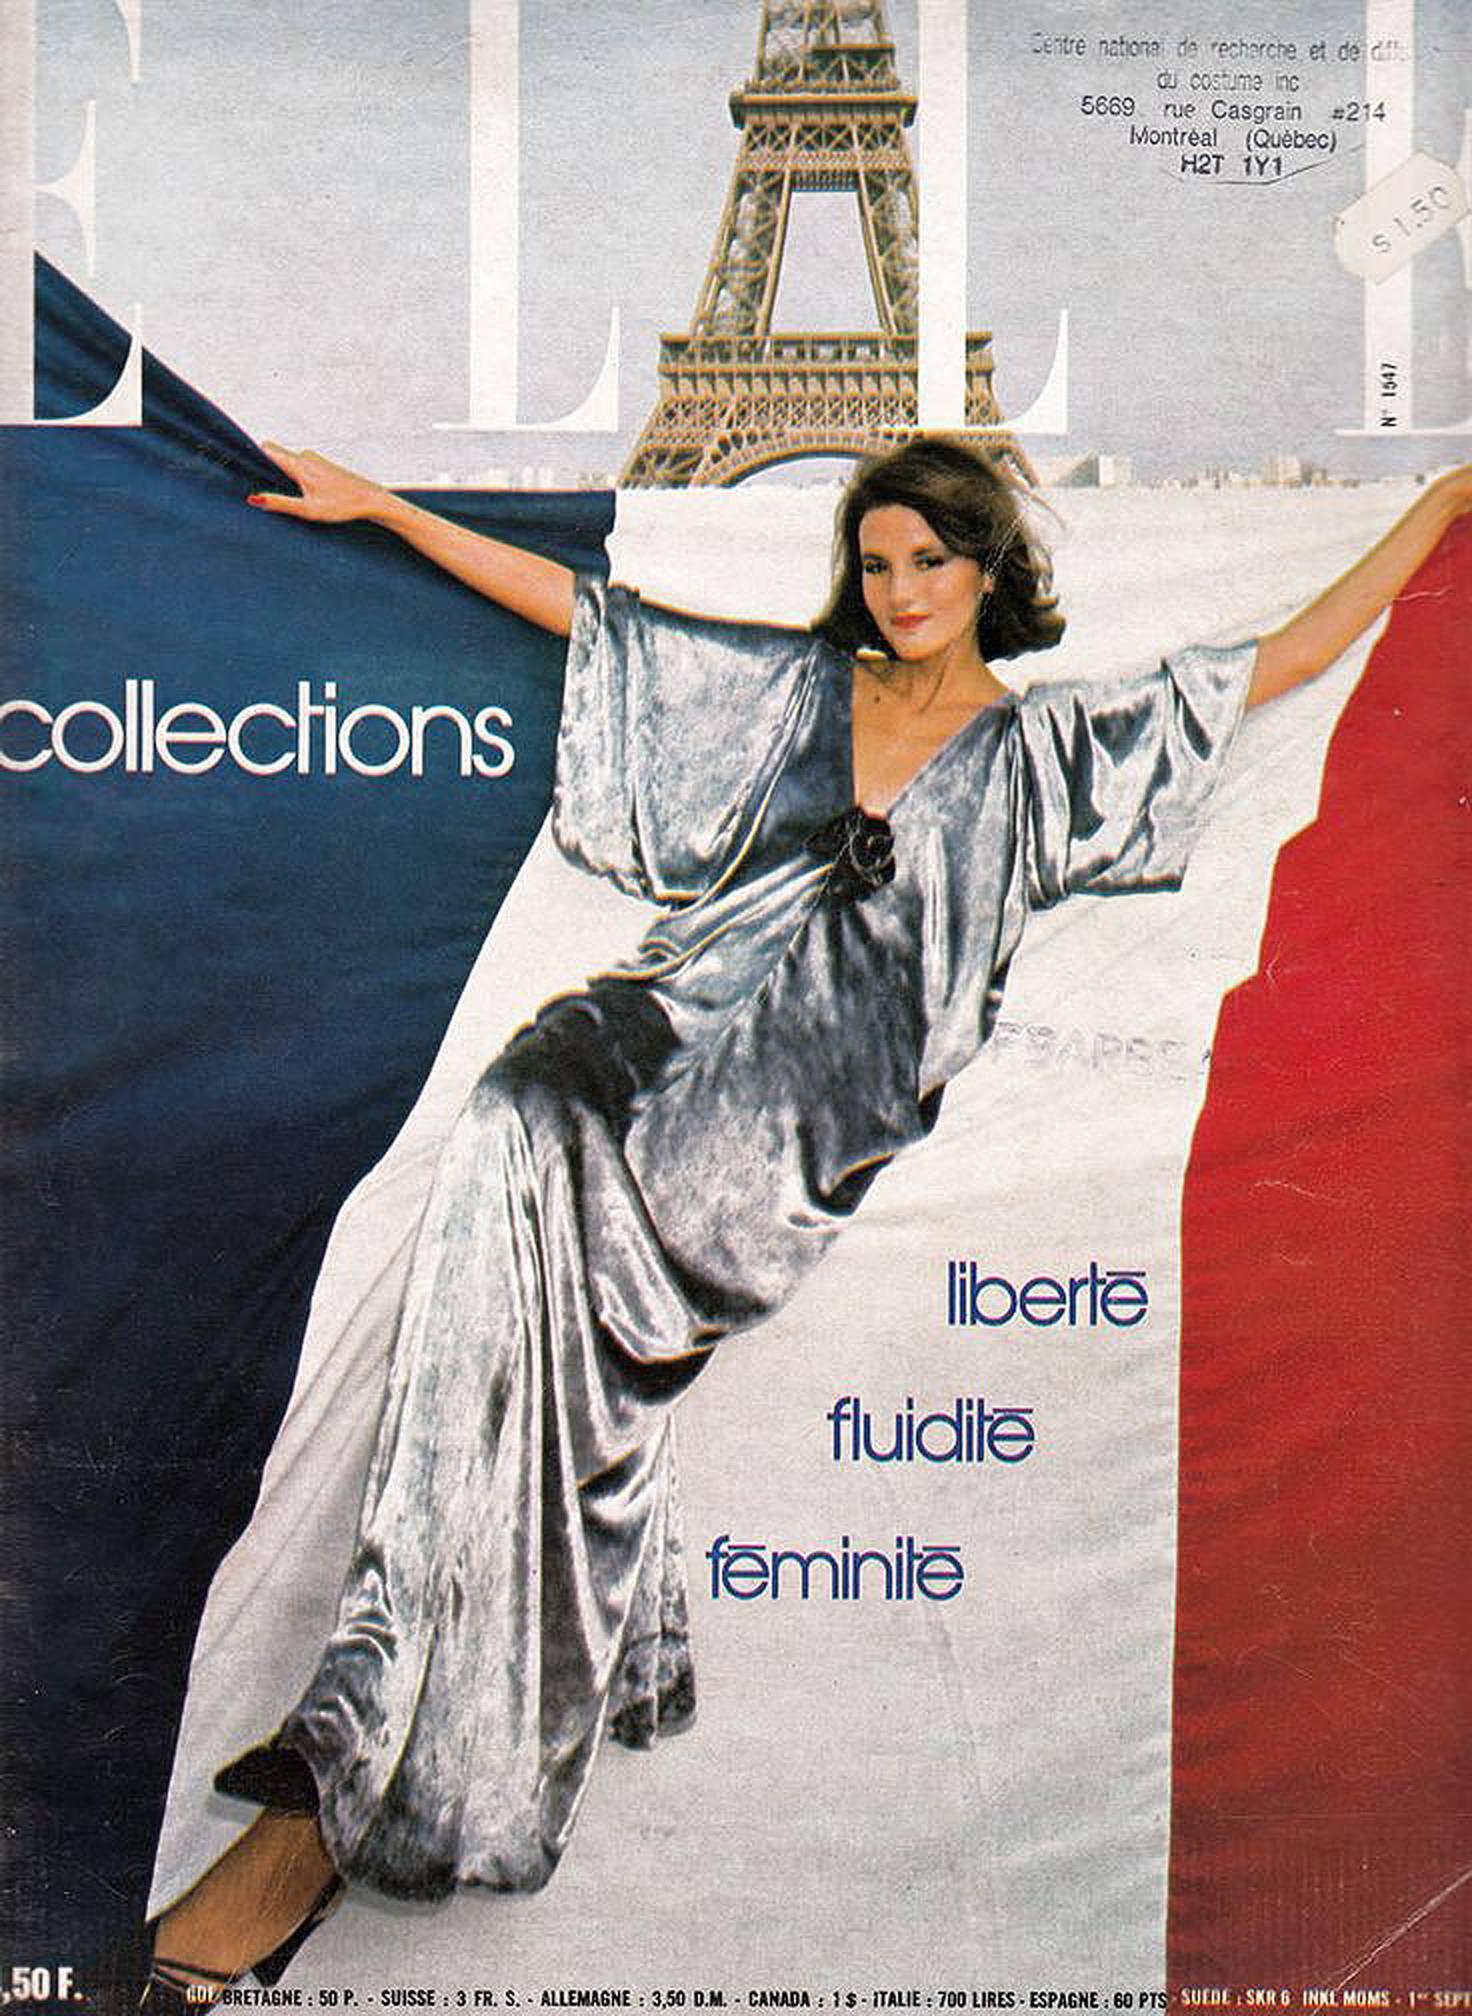 Breathtaking Yves Saint Laurent Haute-Couture caftan gown fashioned in a the most beautiful silver silk-velvet. This amazing garment was featured on the cover of Elle France magazine September 1975. The fabric is ultra-soft; it literally floats and